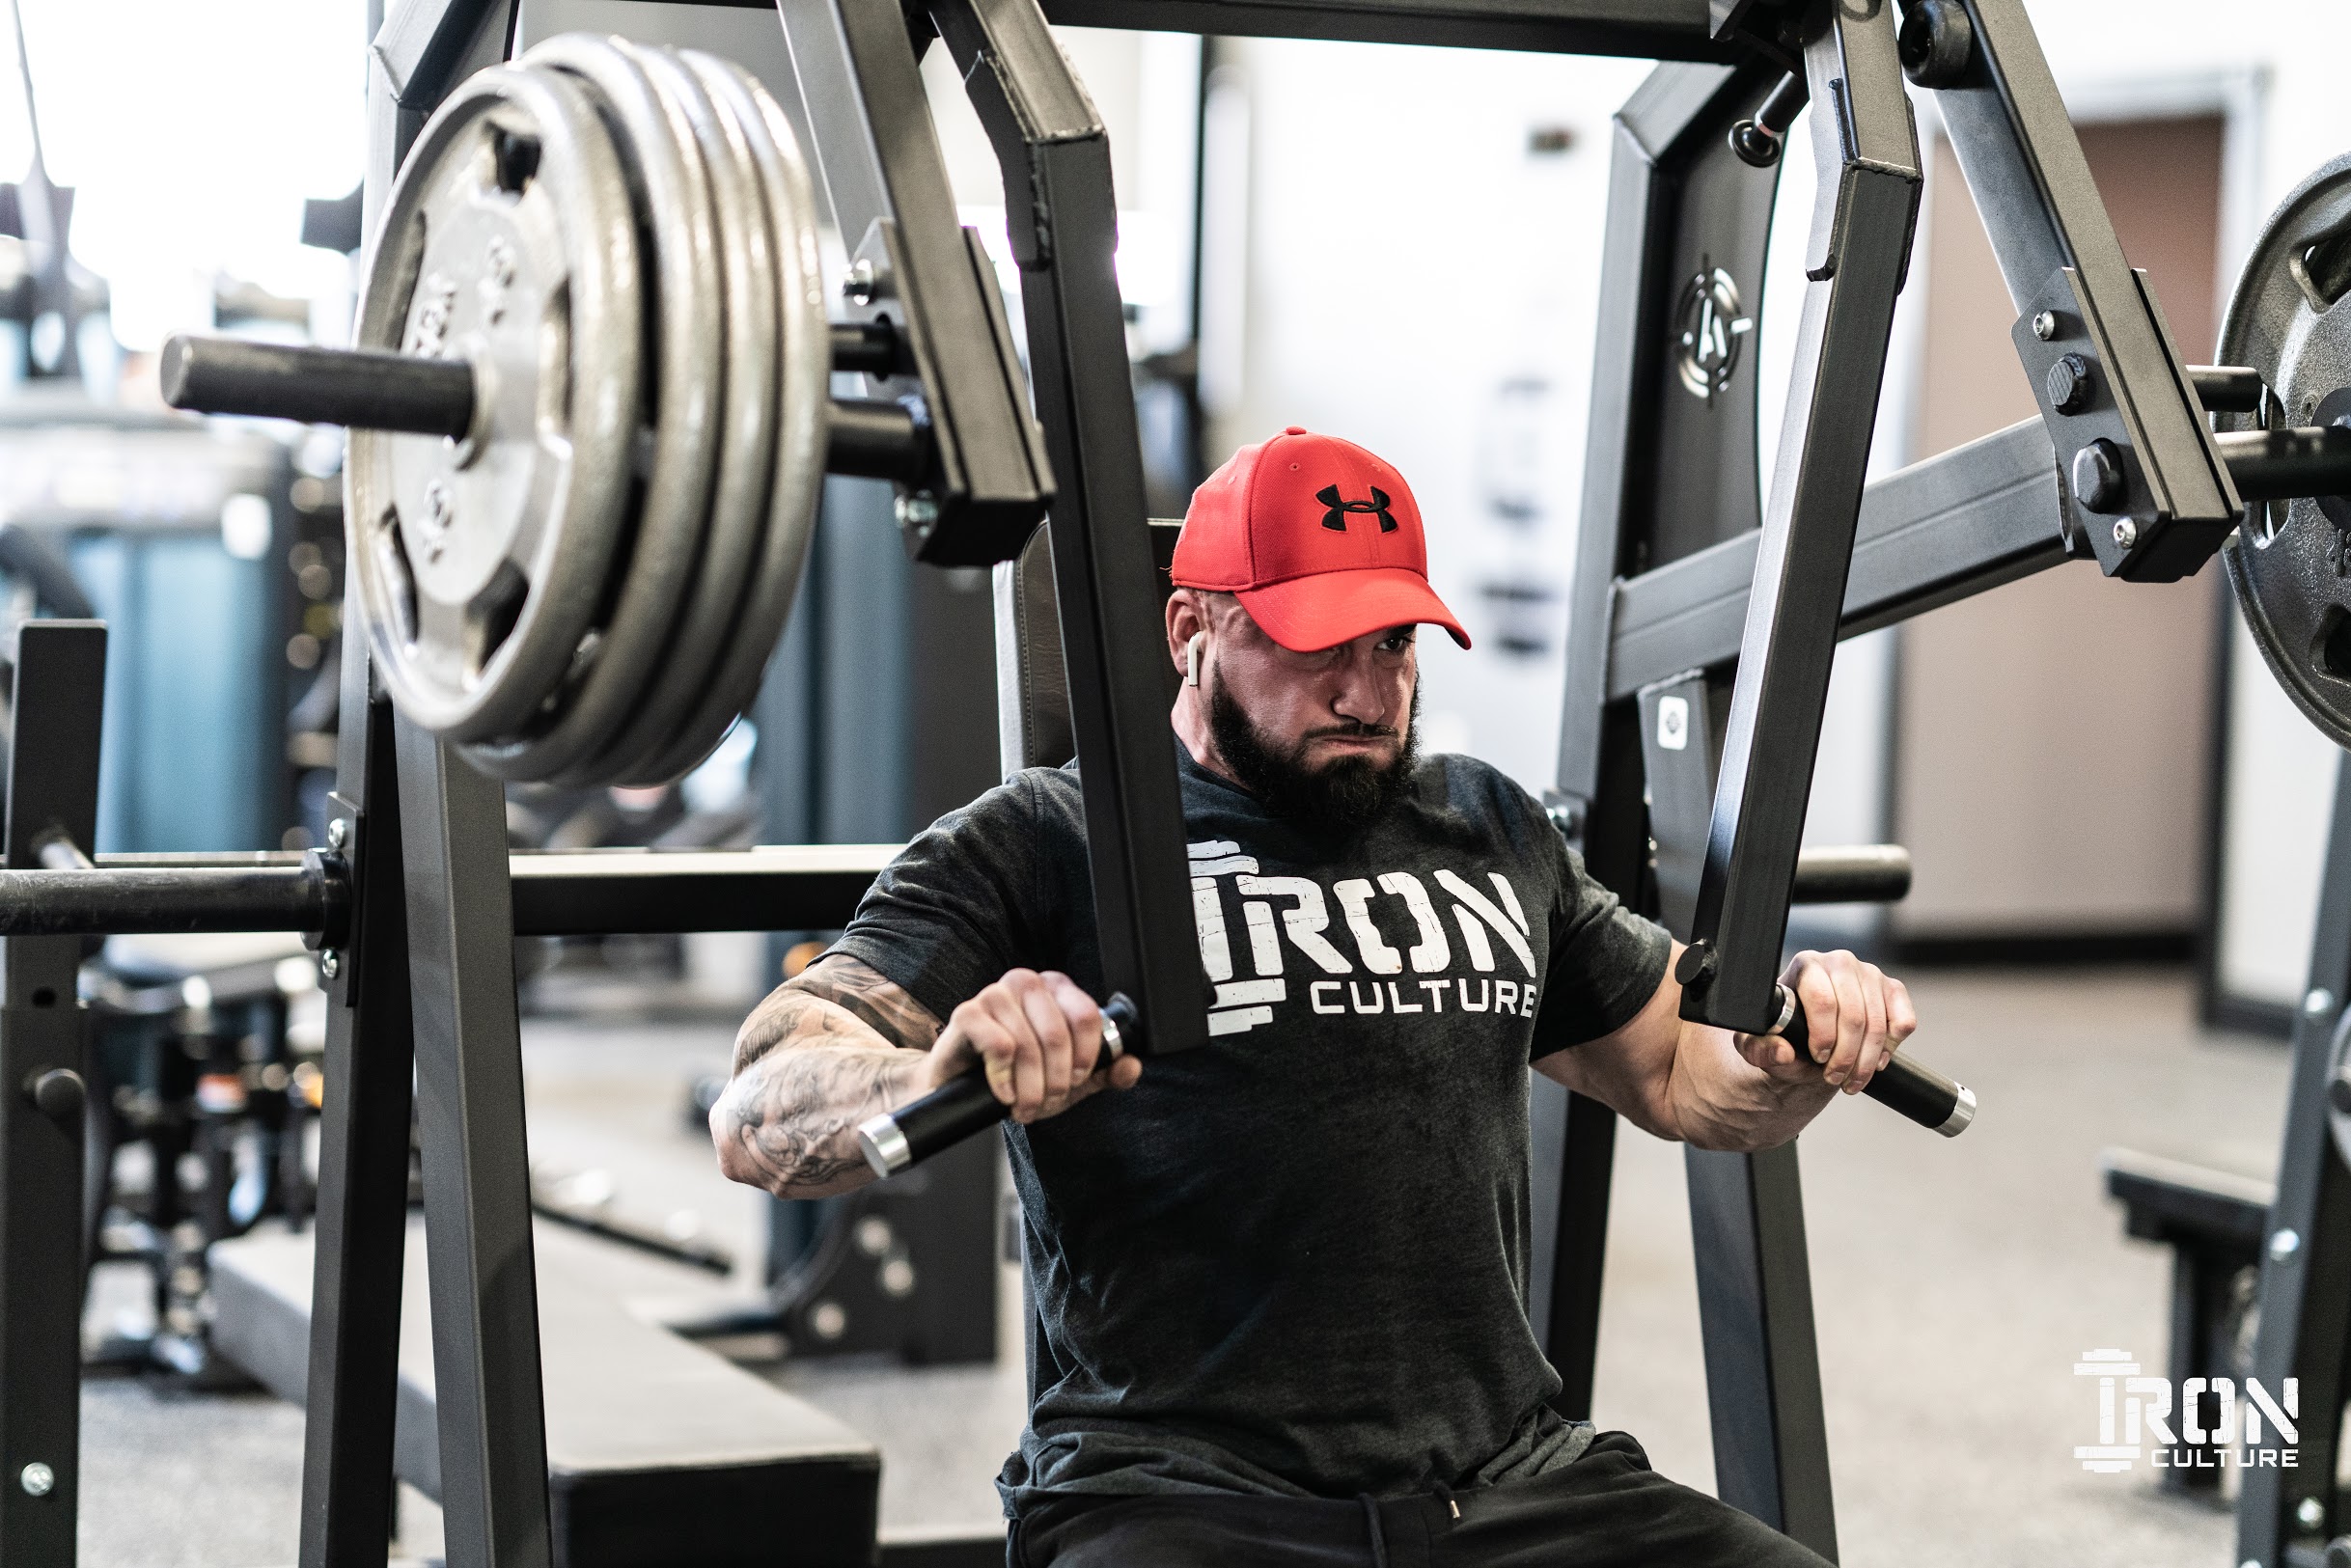 The gym has attracted over 6,700 Instagram followers, where staffers frequently post images of its results-oriented members and first-class equipment and setup.